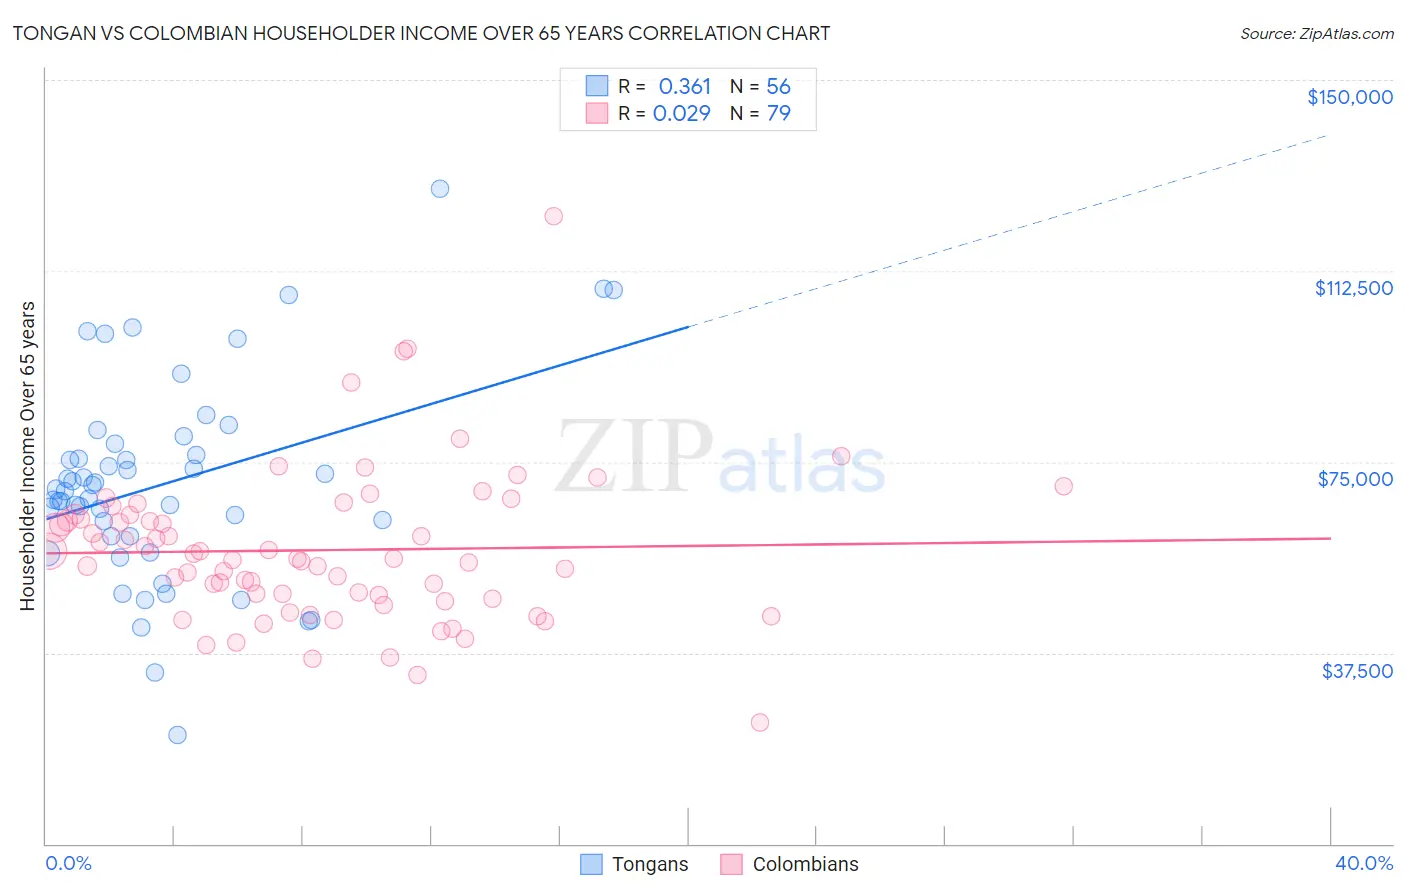 Tongan vs Colombian Householder Income Over 65 years